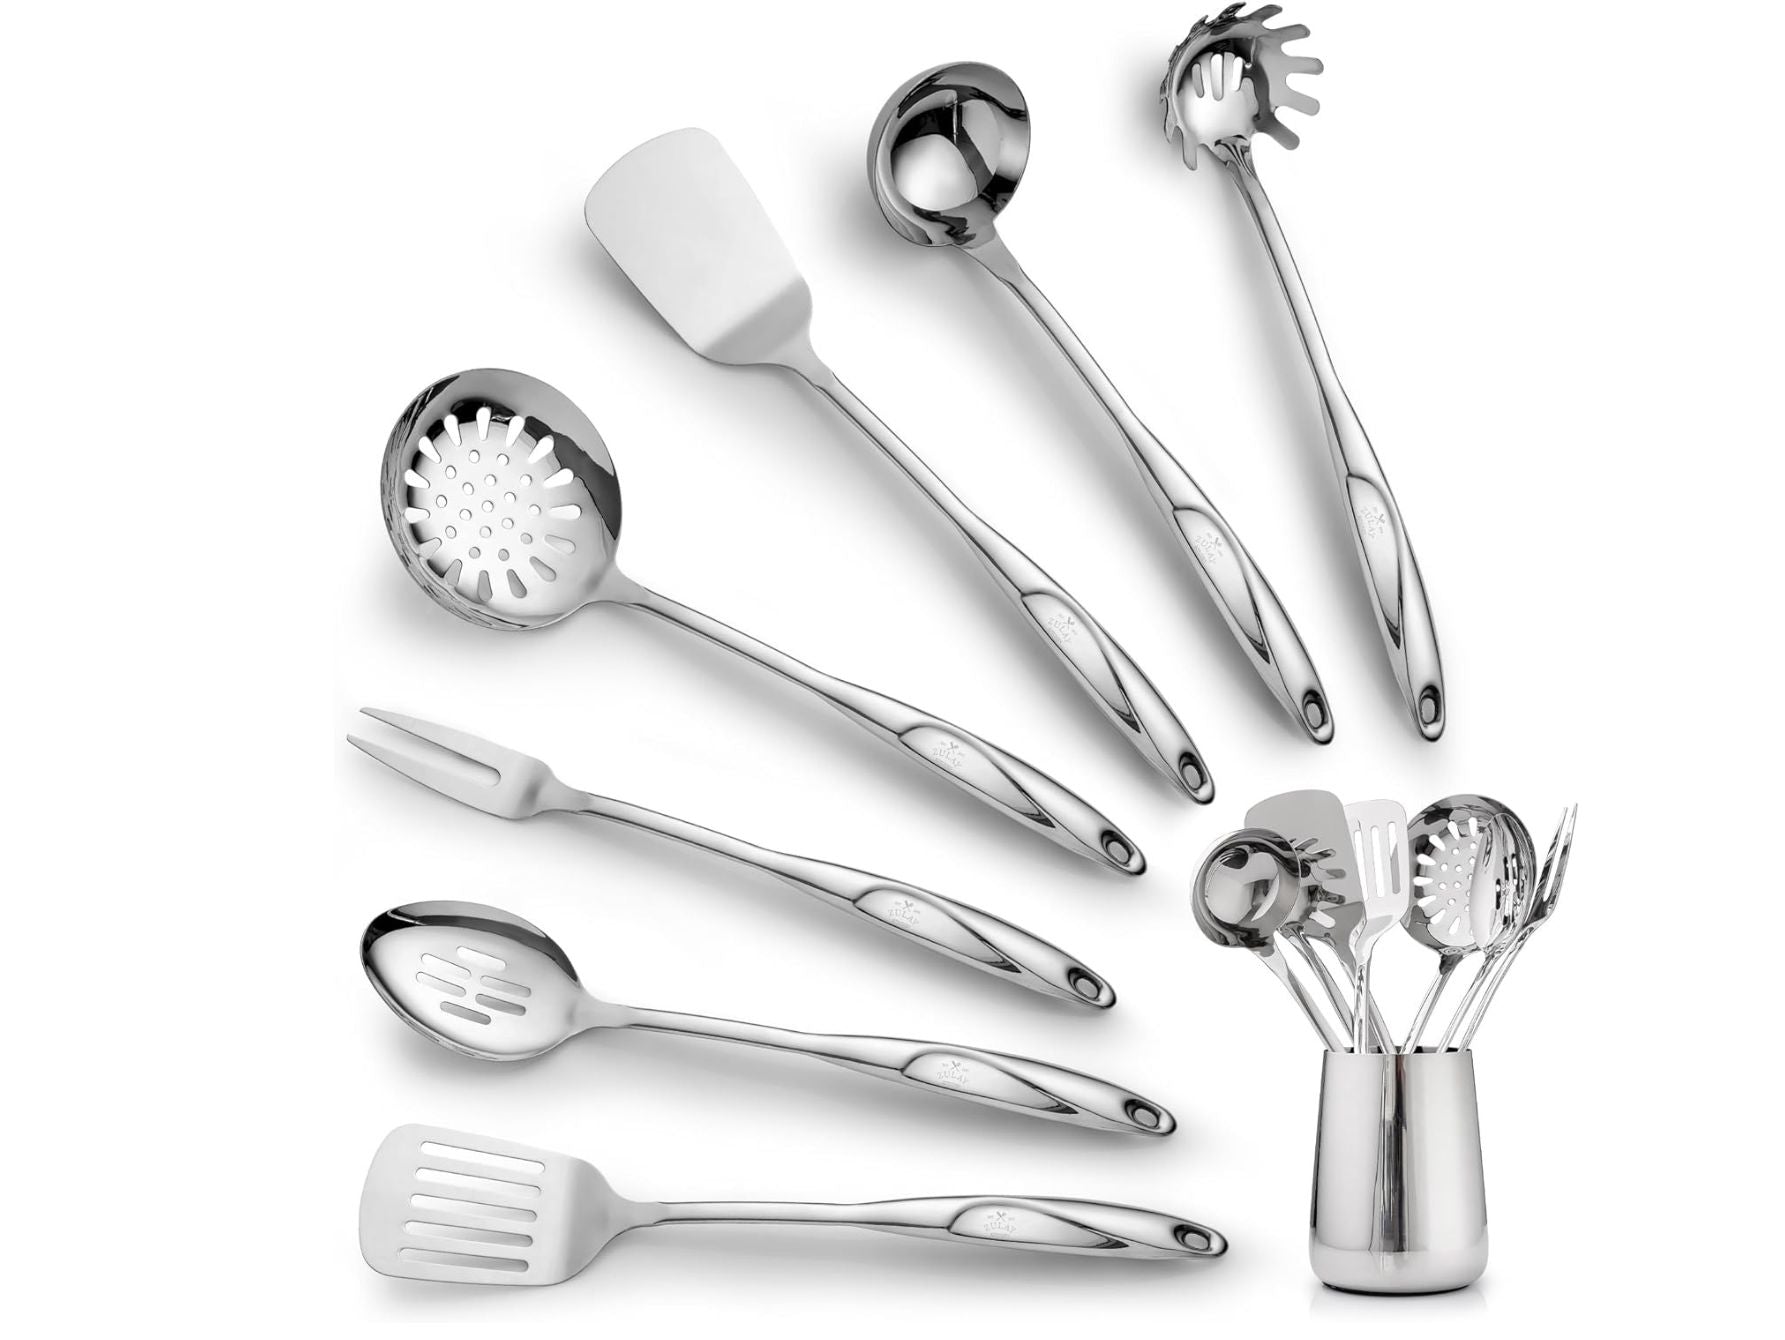 Cooking Utensil Stainless Steel (8 Piece Set)